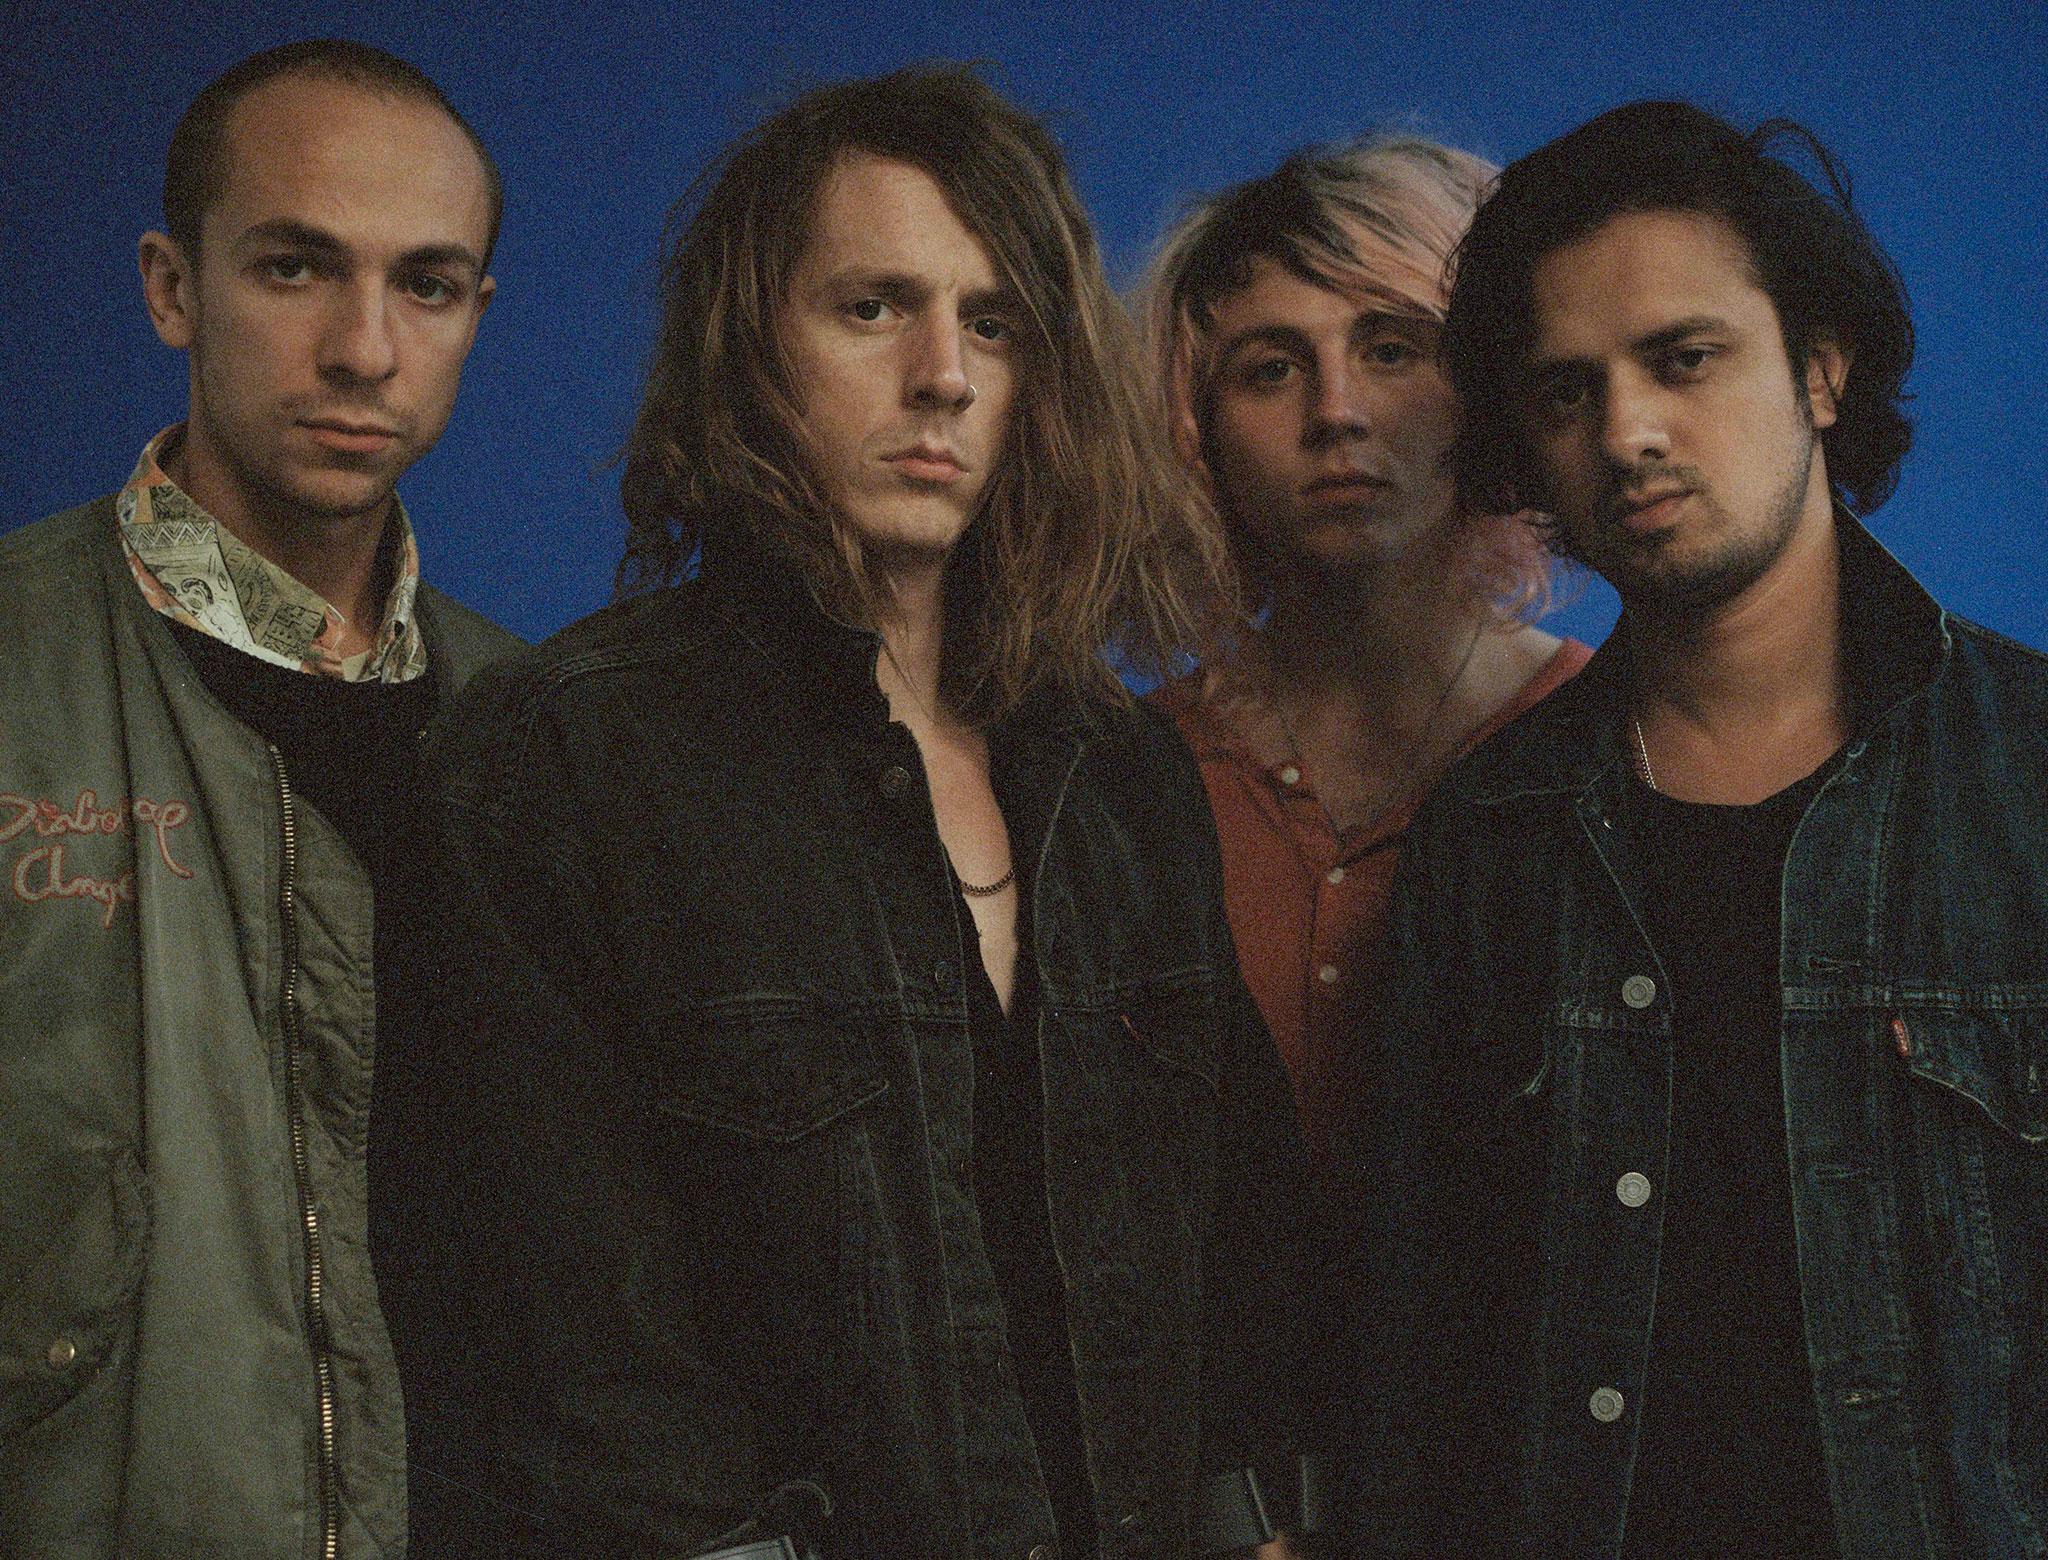 the mystery jets tour